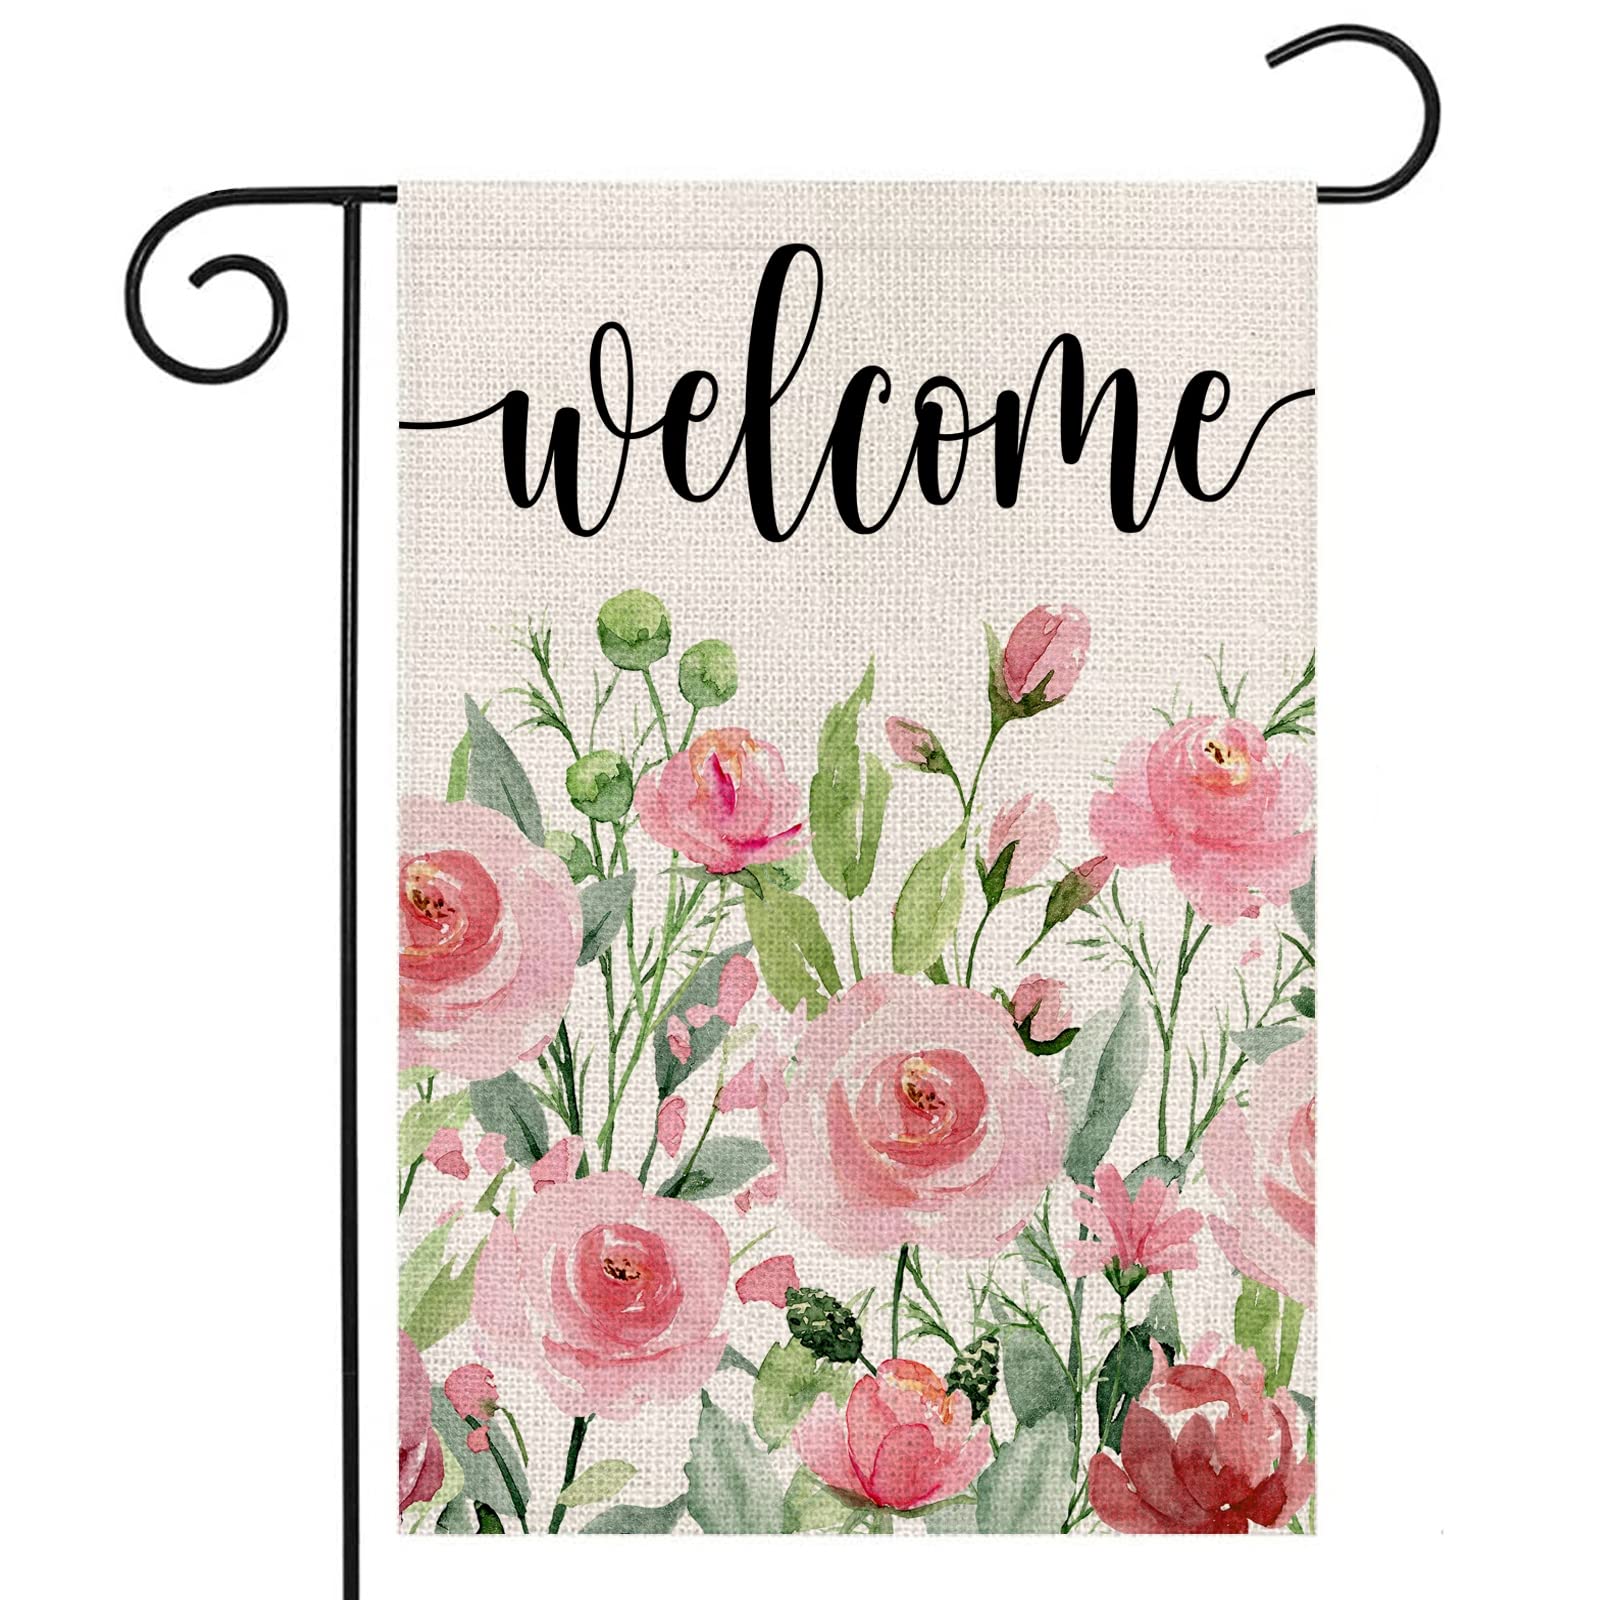 EKOREST Spring Garden Flag 12x18 Inch Double Sided,Welcome Watercolor Roses Small Yard Flag for Outdoor, Summer Seasonal Decors for Anniversary Wedding Farmhouse Holiday Outside